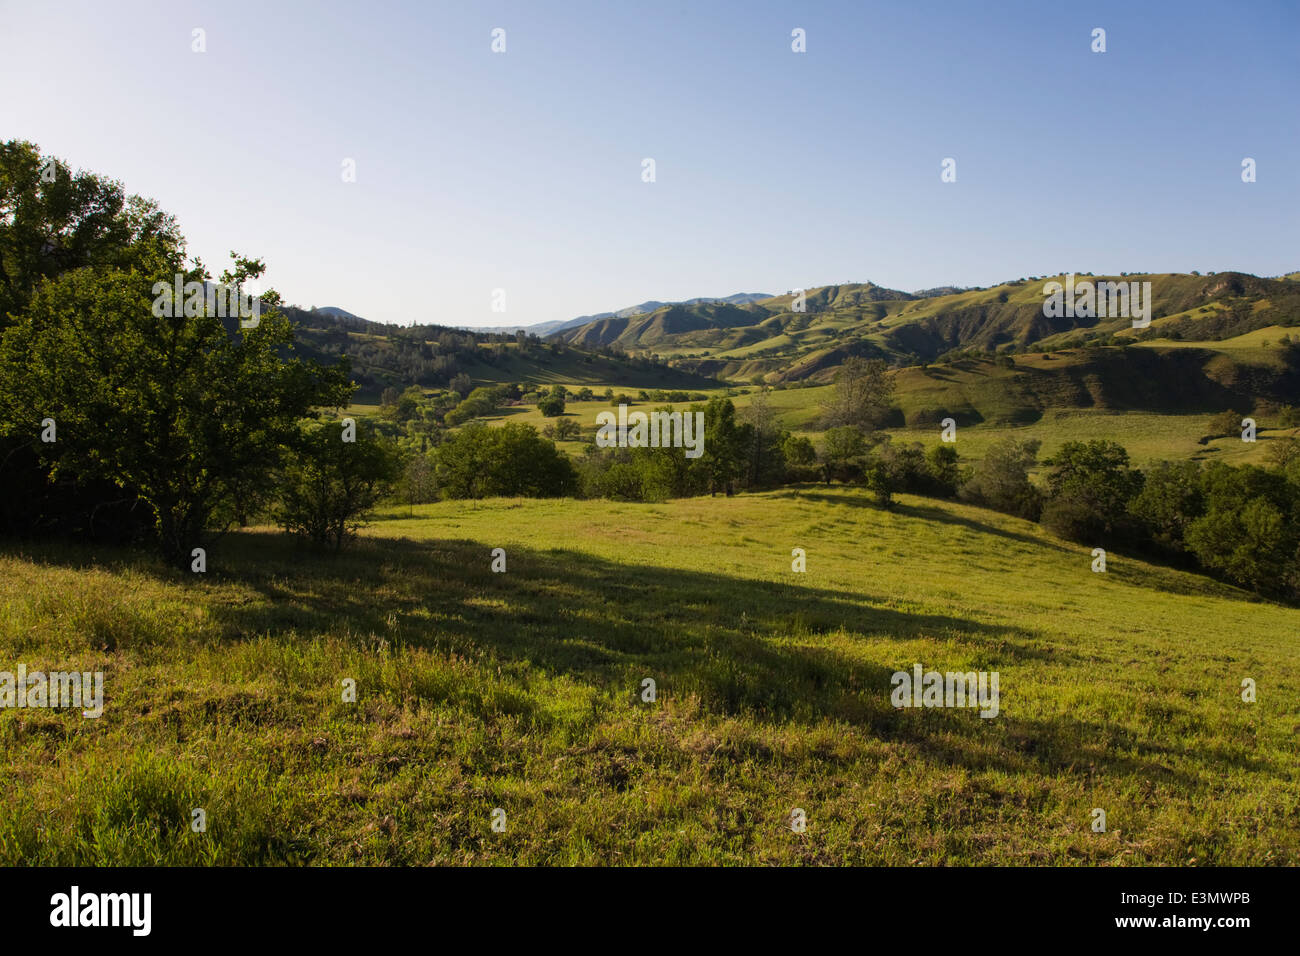 A Coastal Range cattle ranch in central CALIFORNIA Stock Photo